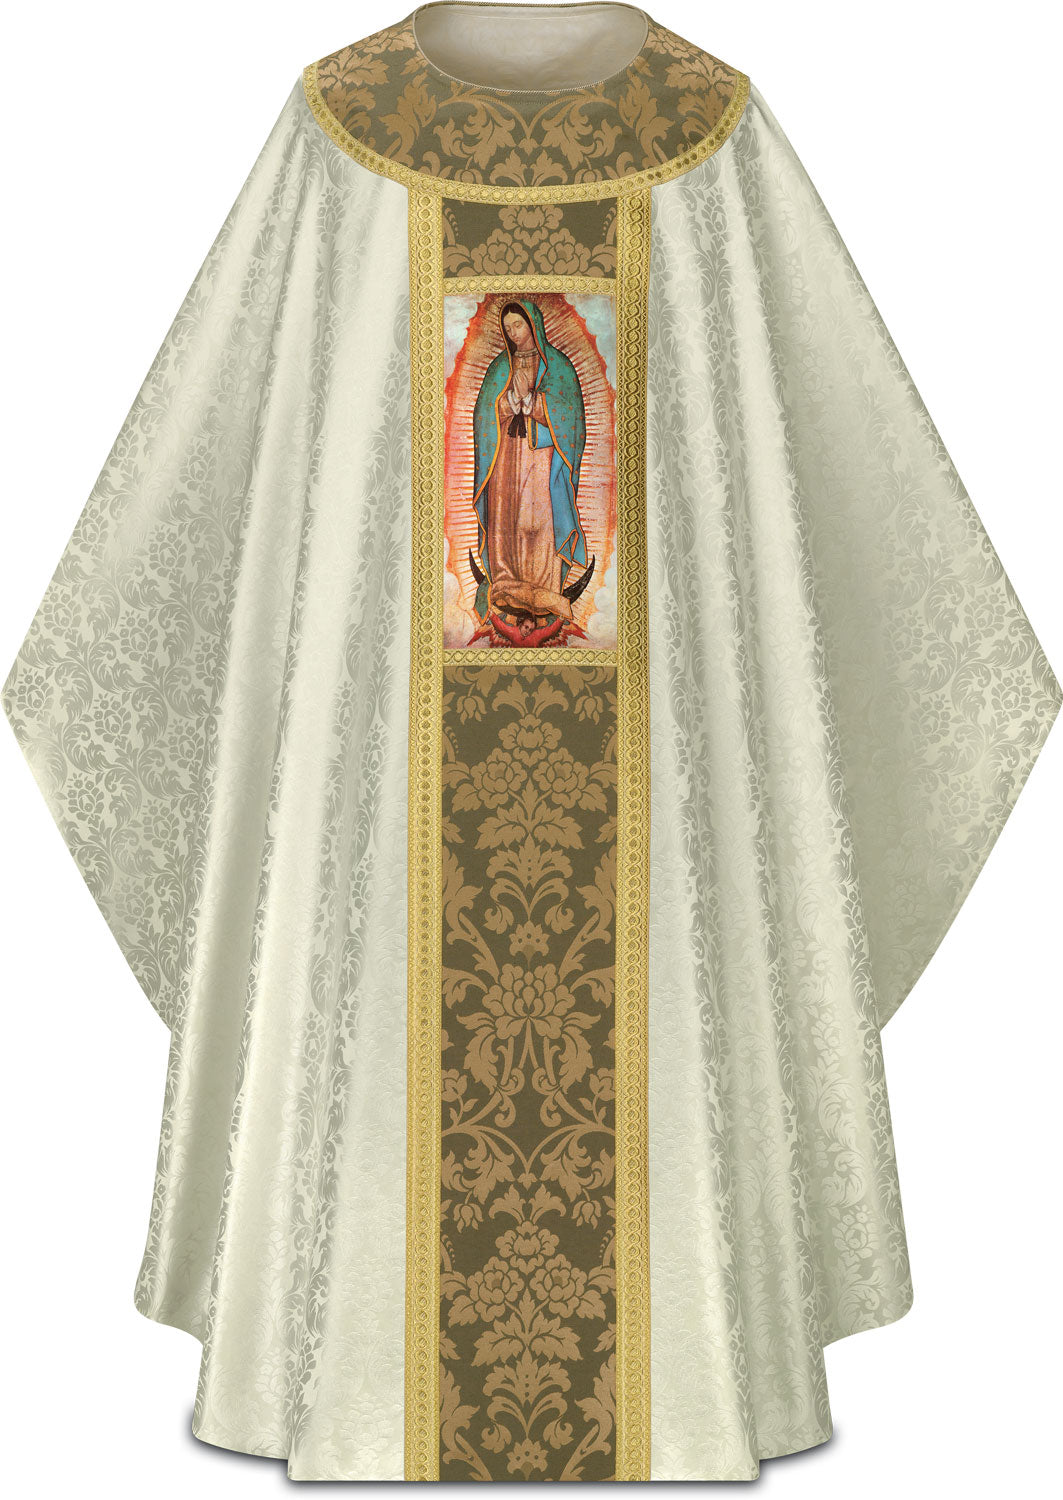 our-lady-of-guadalupe-chasuble-5301.jpg